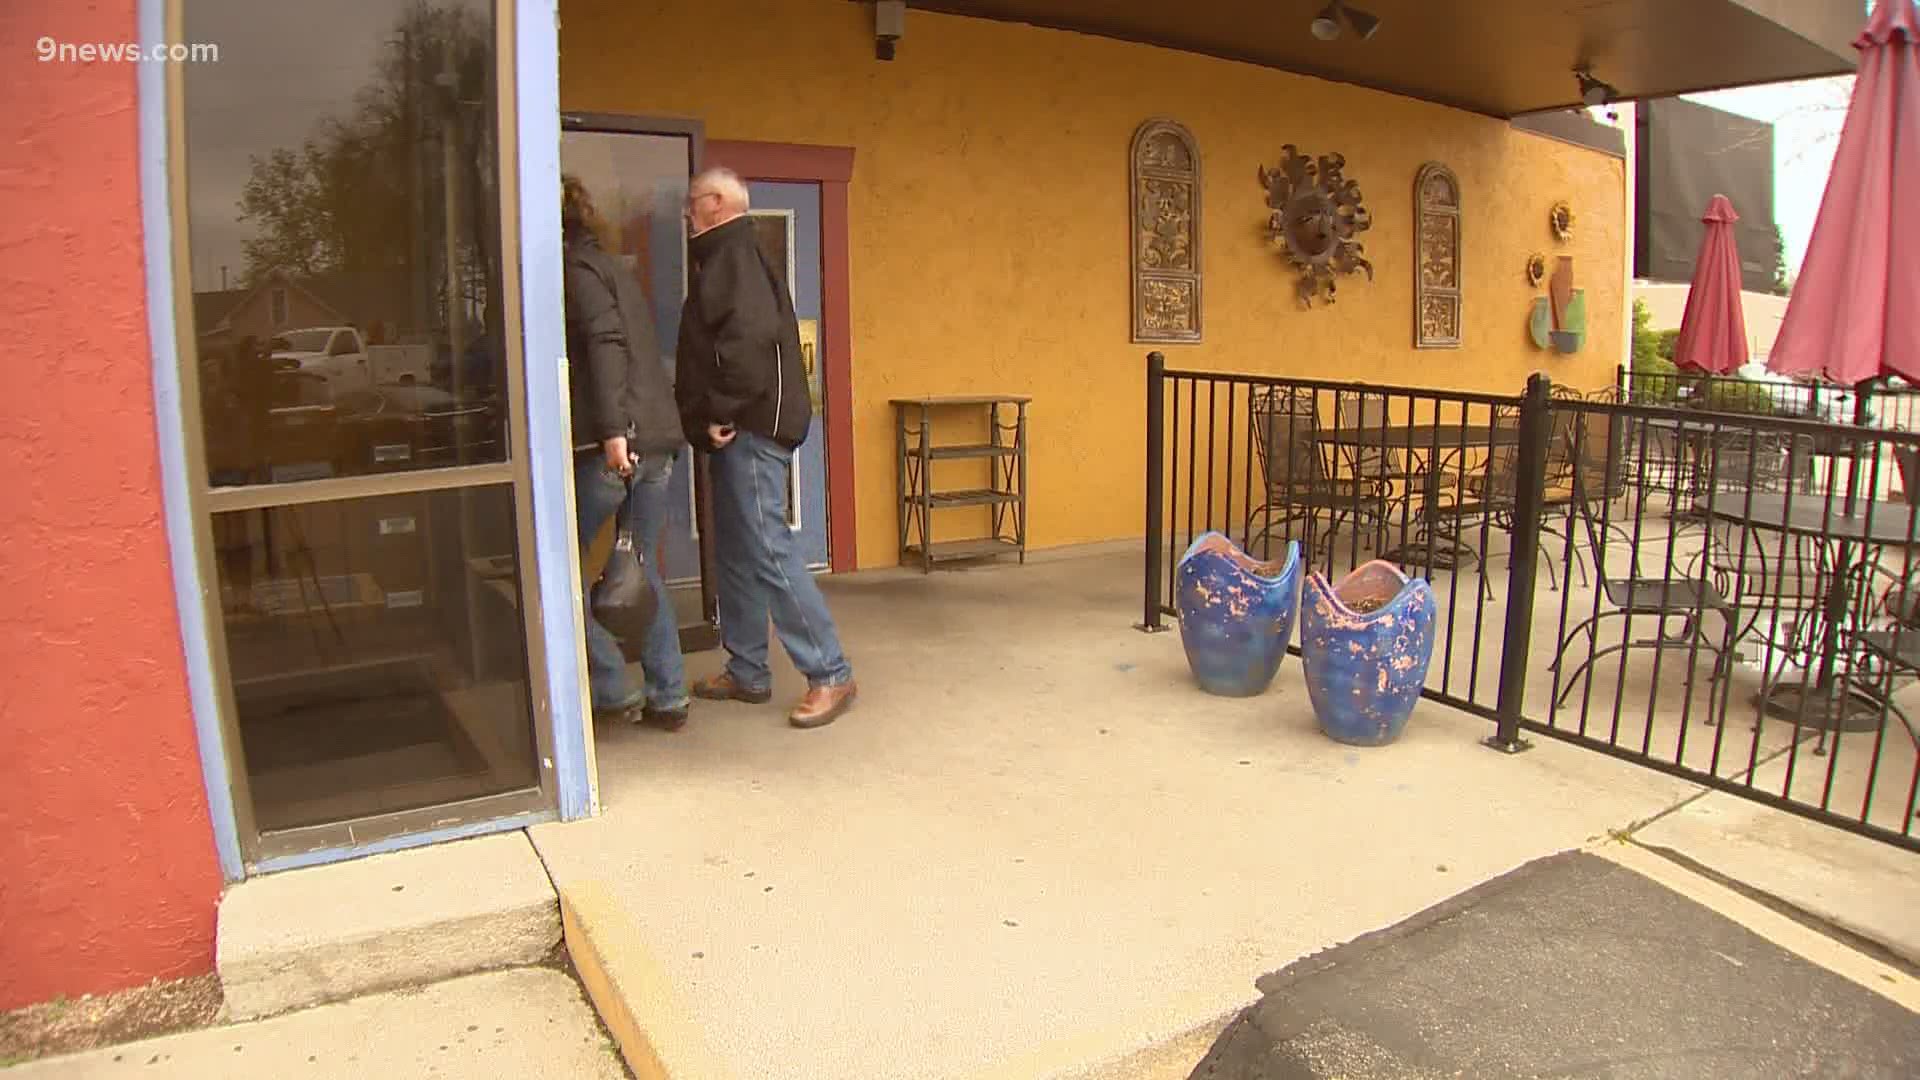 9NEWS reporter Katie Eastman spoke with the owner of a Mexican restaurant who has had a packed house for almost a week.